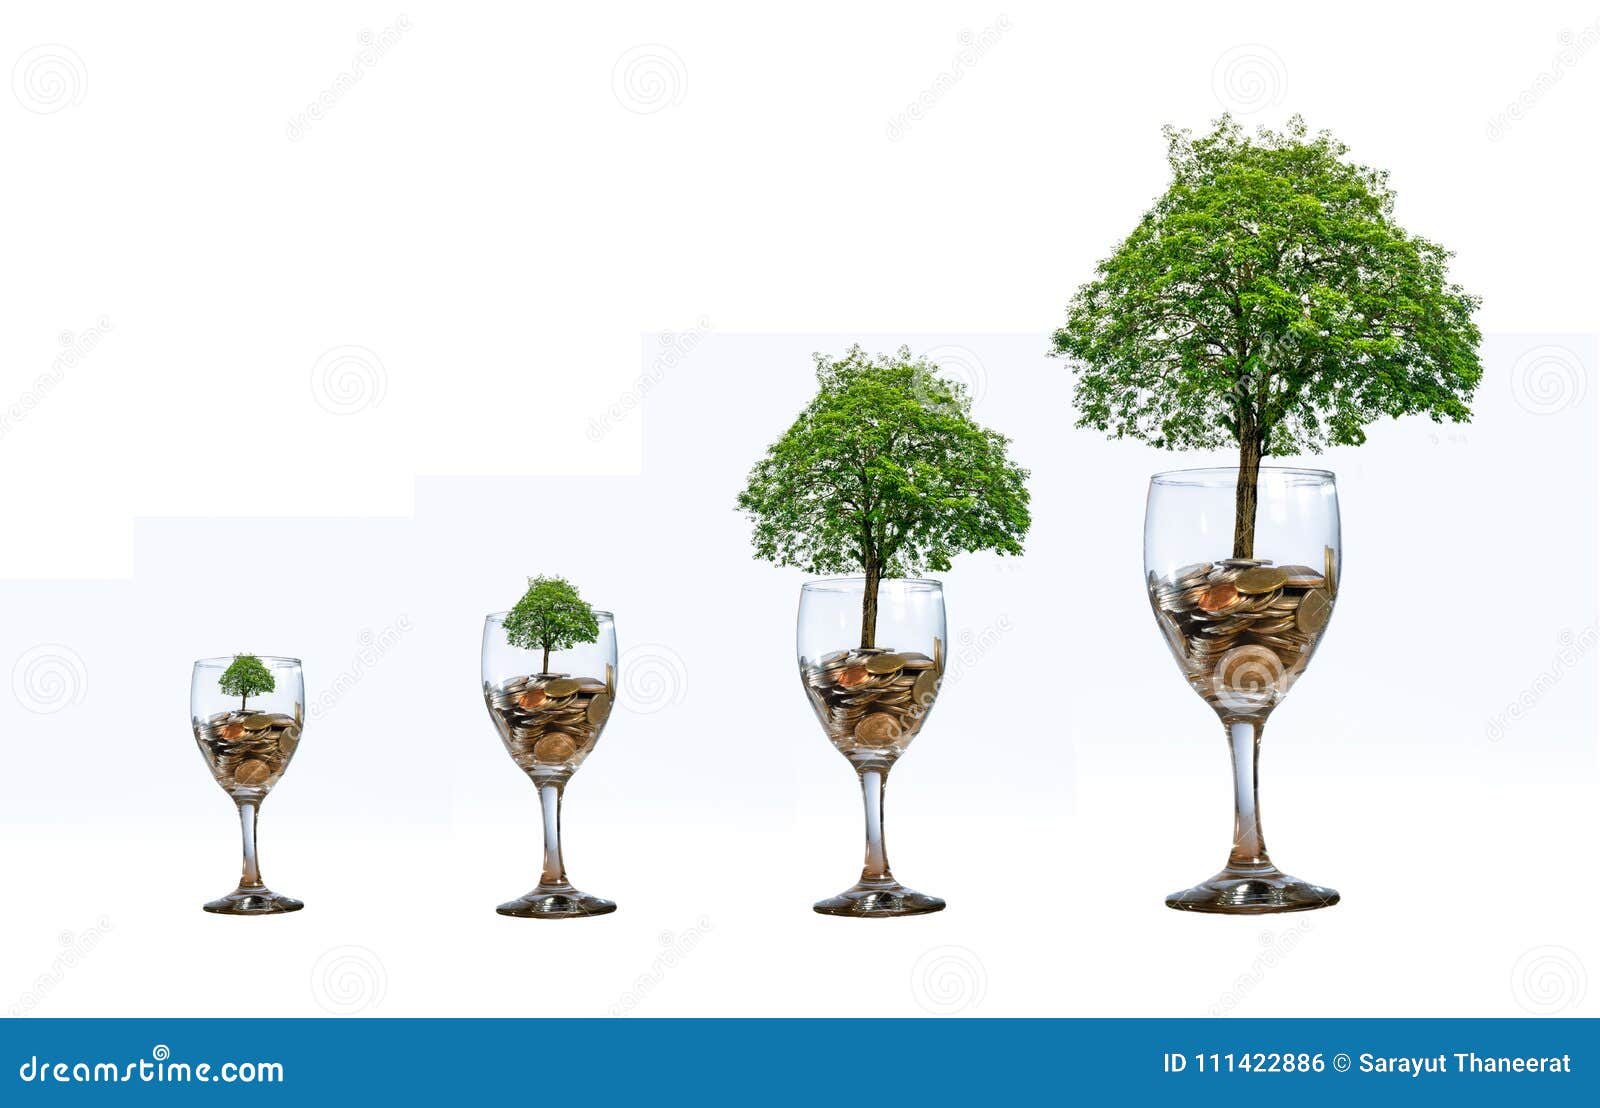 tree coin glass isolate increase saving money hand coin tree the tree grows on the pile. saving money for the future. investment i